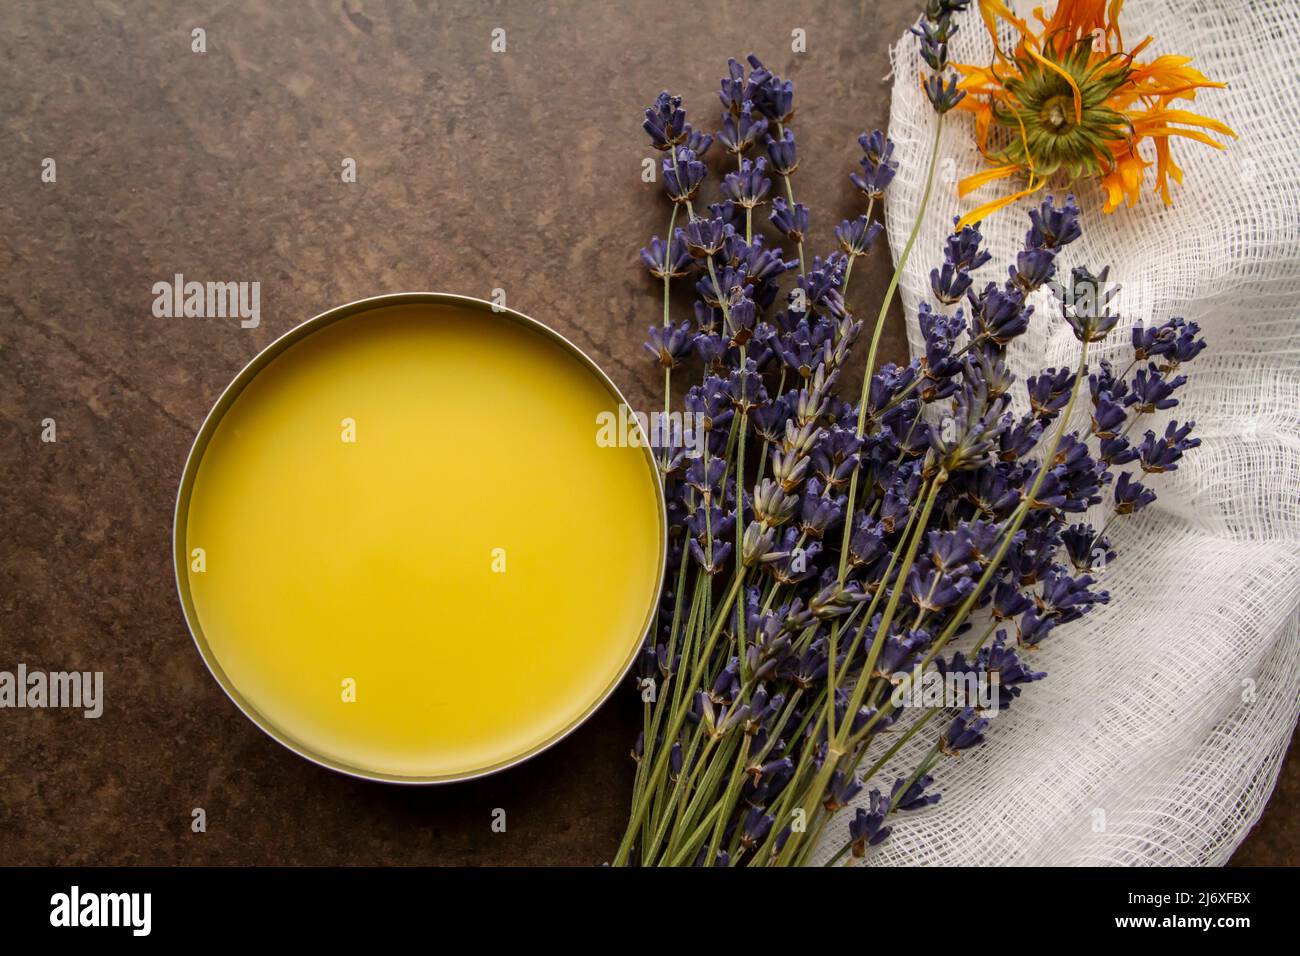 Closeup image taken from above of a tin of homemade DIY calendula and lavender salve next to the dried herbs and cheesecloth on brown tile background. Stock Photo